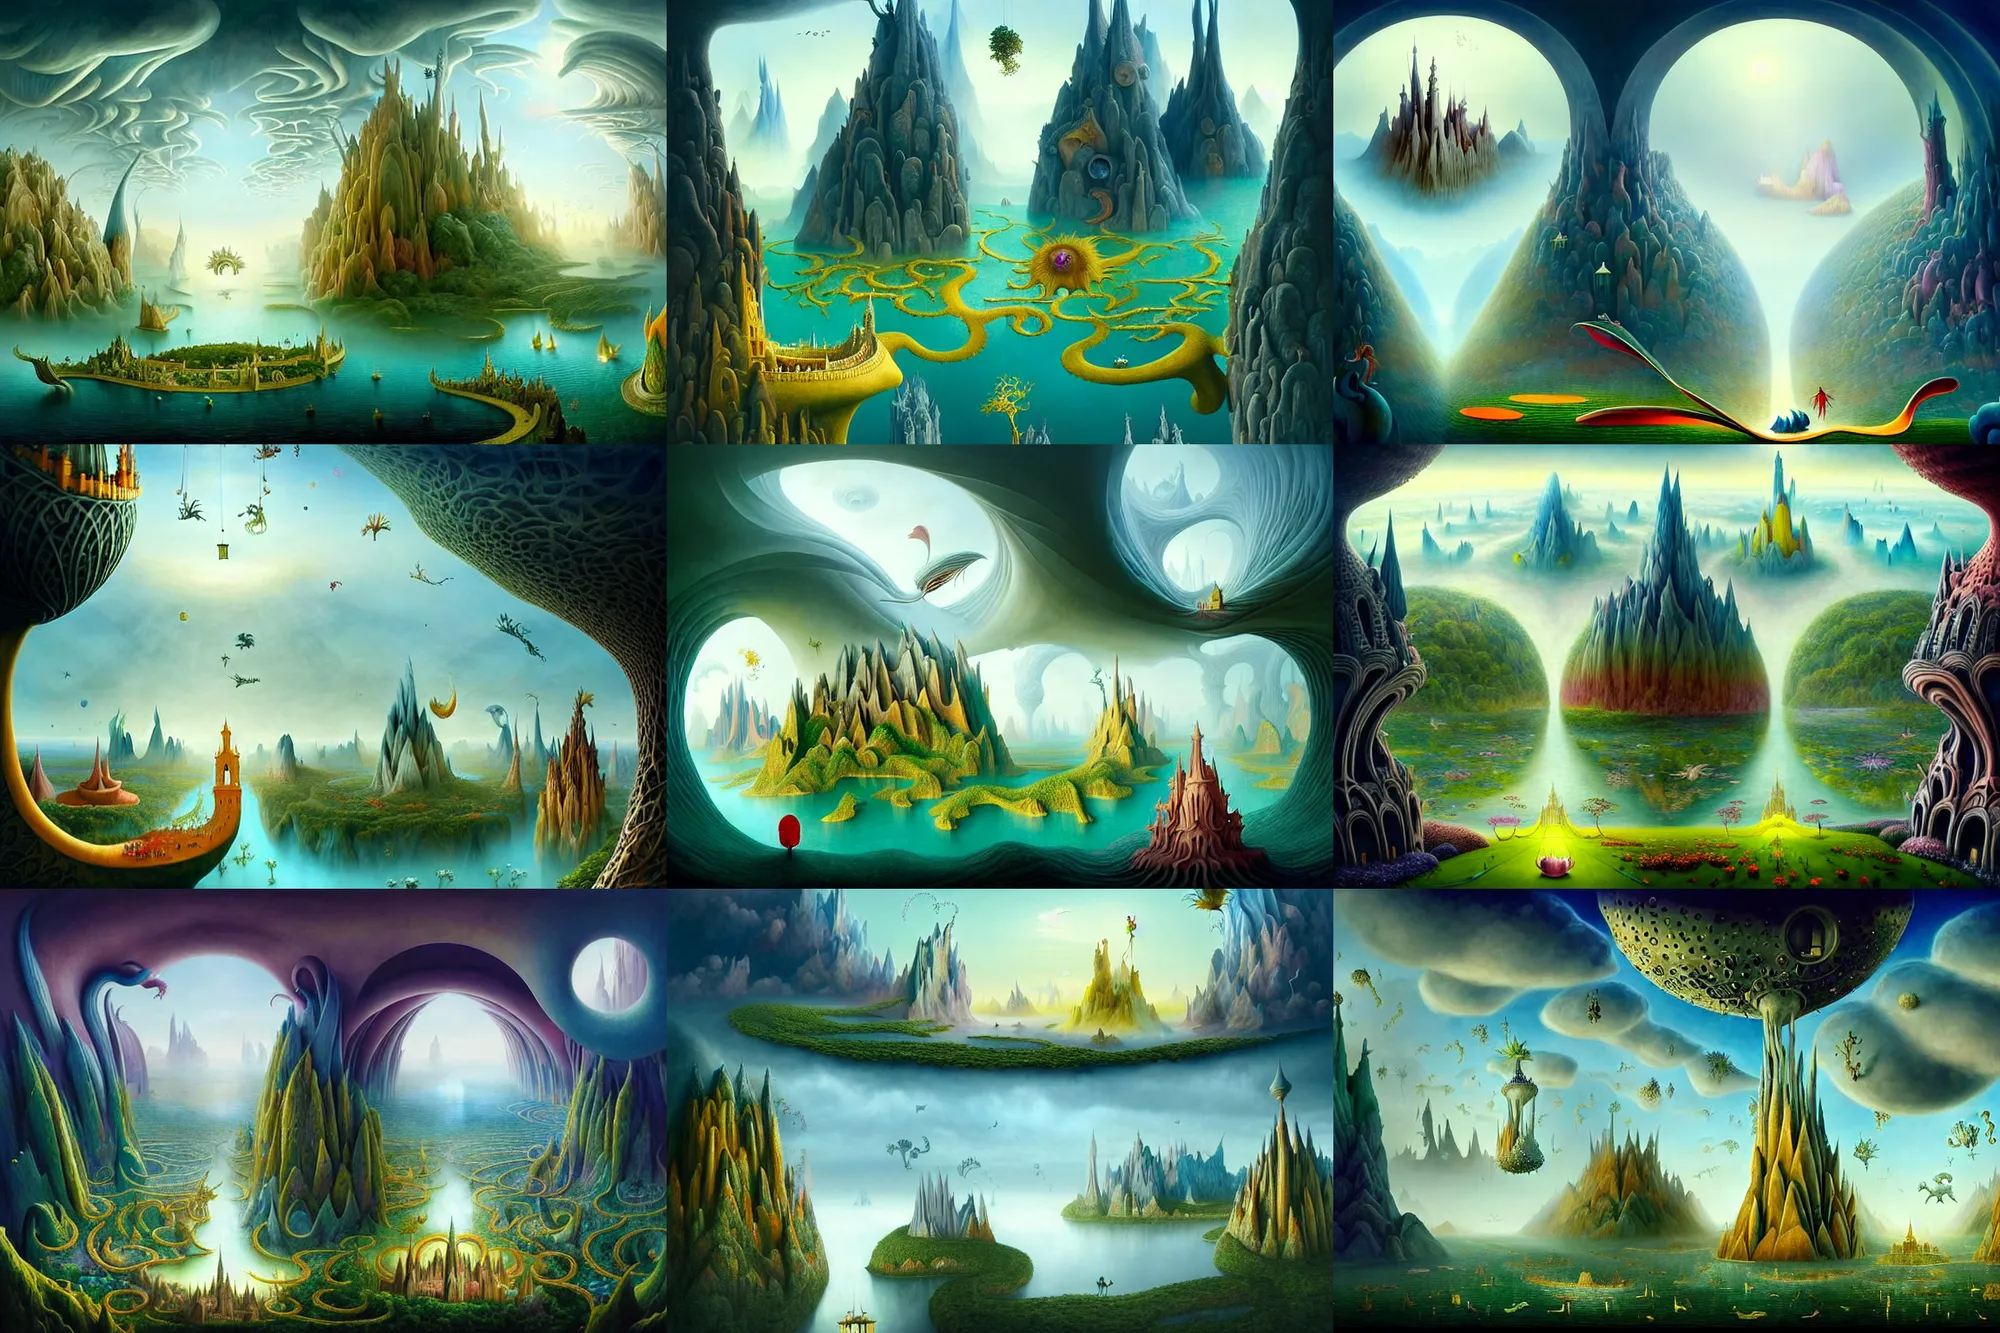 Prompt: a beguiling epic stunning beautiful and insanely detailed matte painting of windows into dream worlds with surreal architecture designed by Heironymous Bosch, dream world populated with mythical whimsical creatures, mega structures inspired by Heironymous Bosch's Garden of Earthly Delights, vast surreal landscape and horizon by Cyril Rolando and Conrad Roset, masterpiece!!!, grand!, imaginative!!!, whimsical!!, epic scale, intricate details, sense of awe, elite, wonder, insanely complex, masterful composition!!!, sharp focus, fantasy realism, dramatic lighting